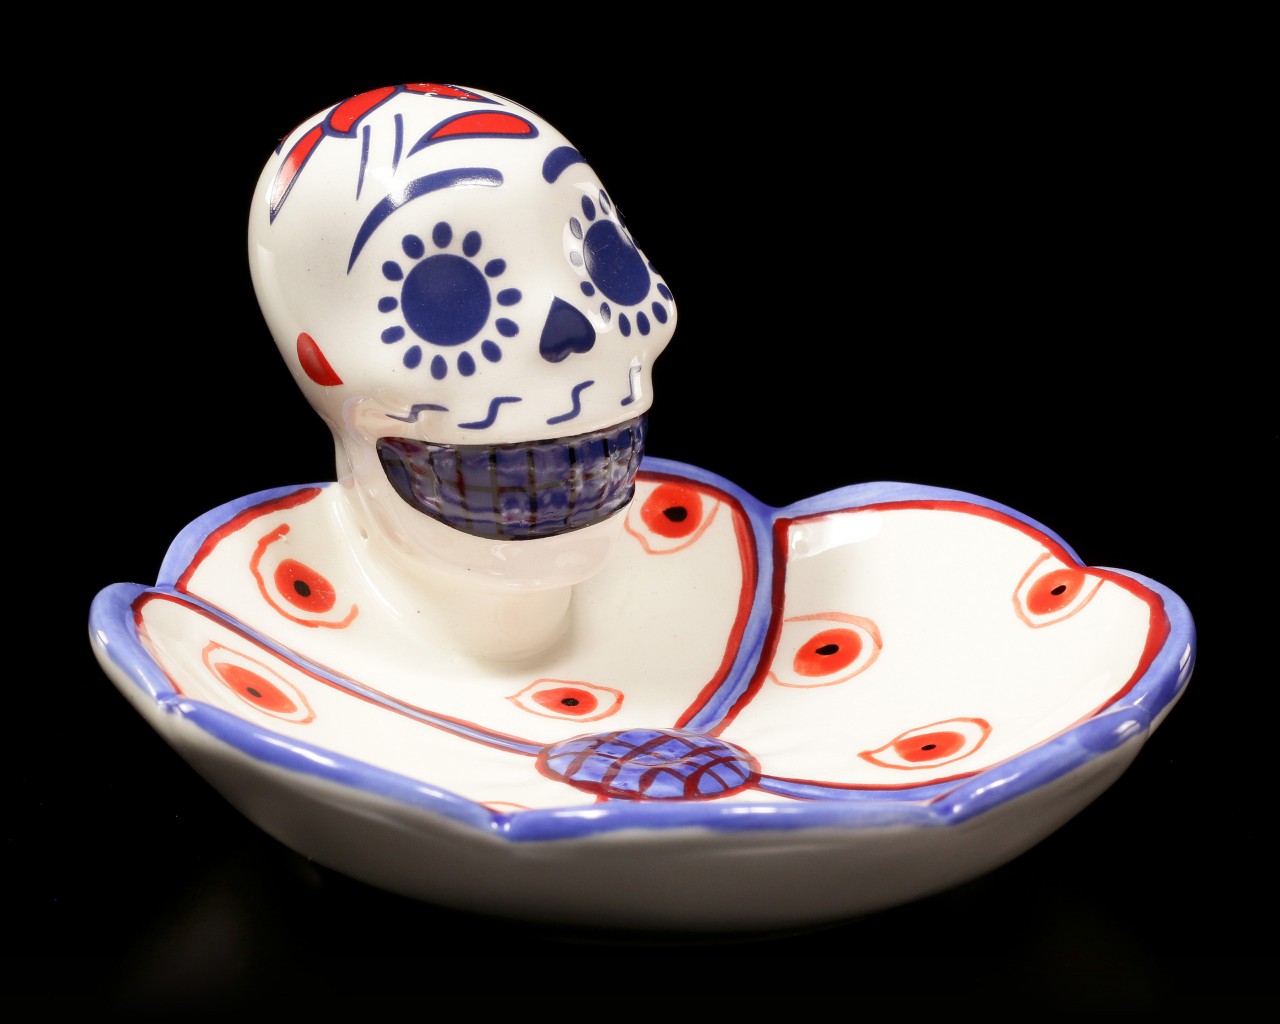 Skull Dish - Day of the Dead - blue